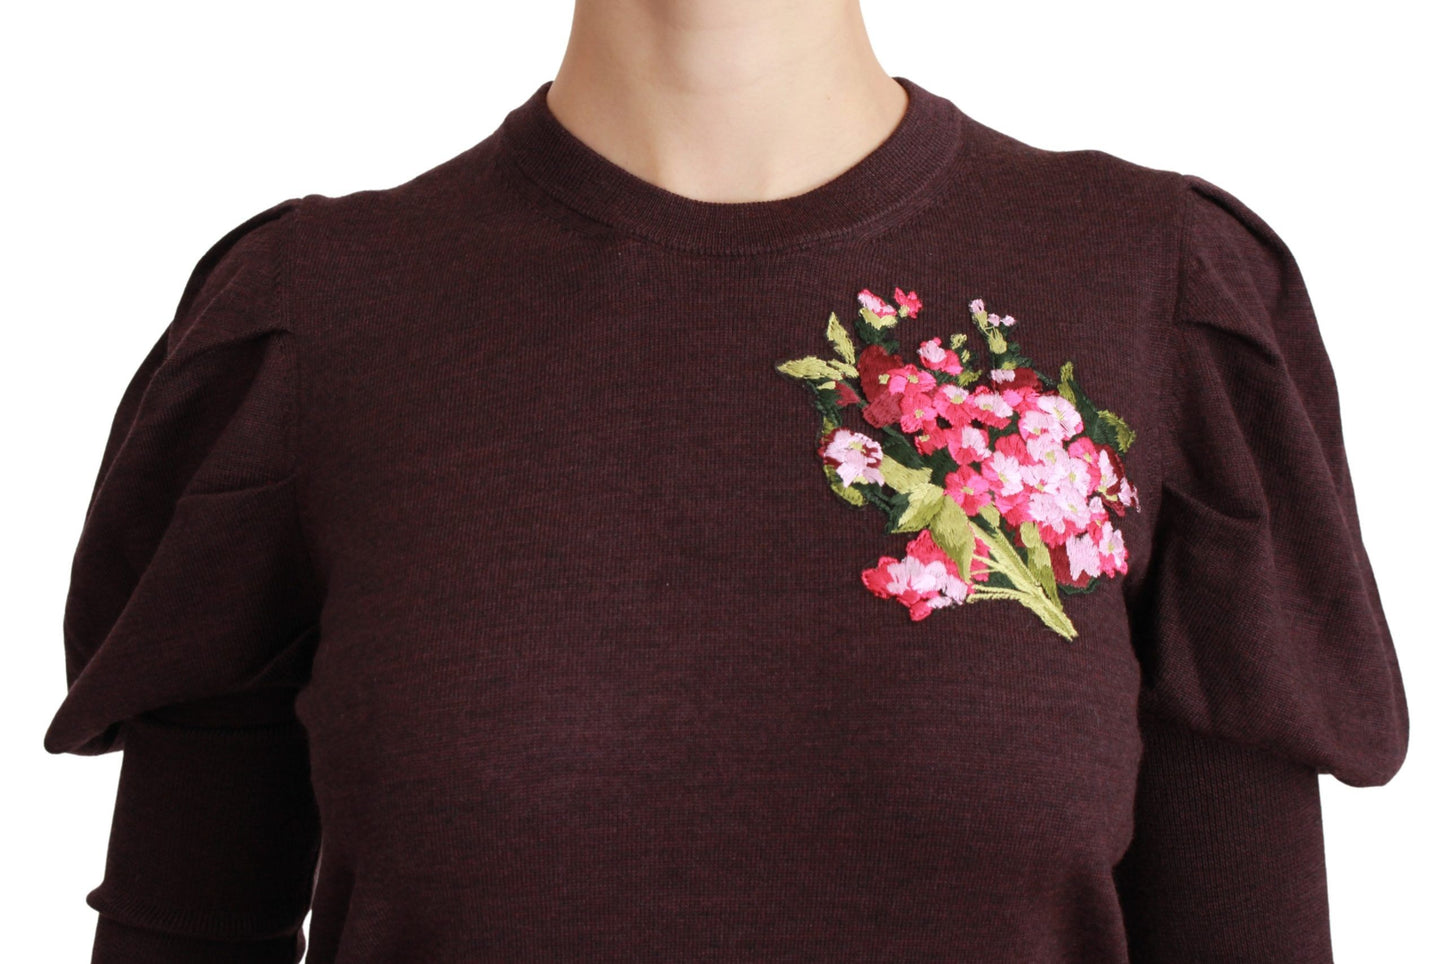 Maroon Floral Embroidered Virgin Wool Sweater